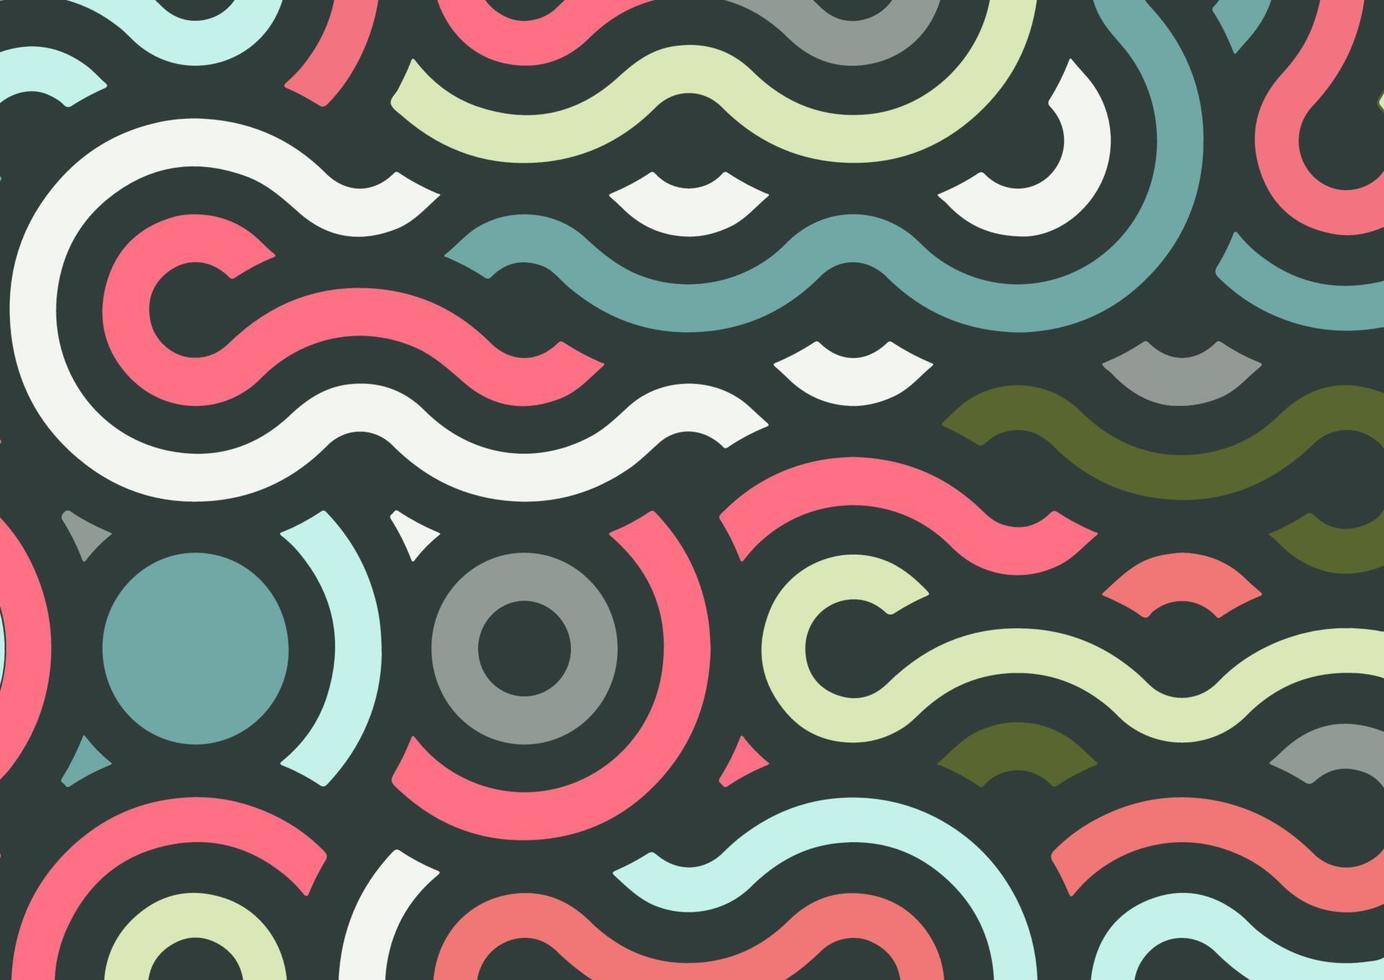 abstract retro pattern design background vector